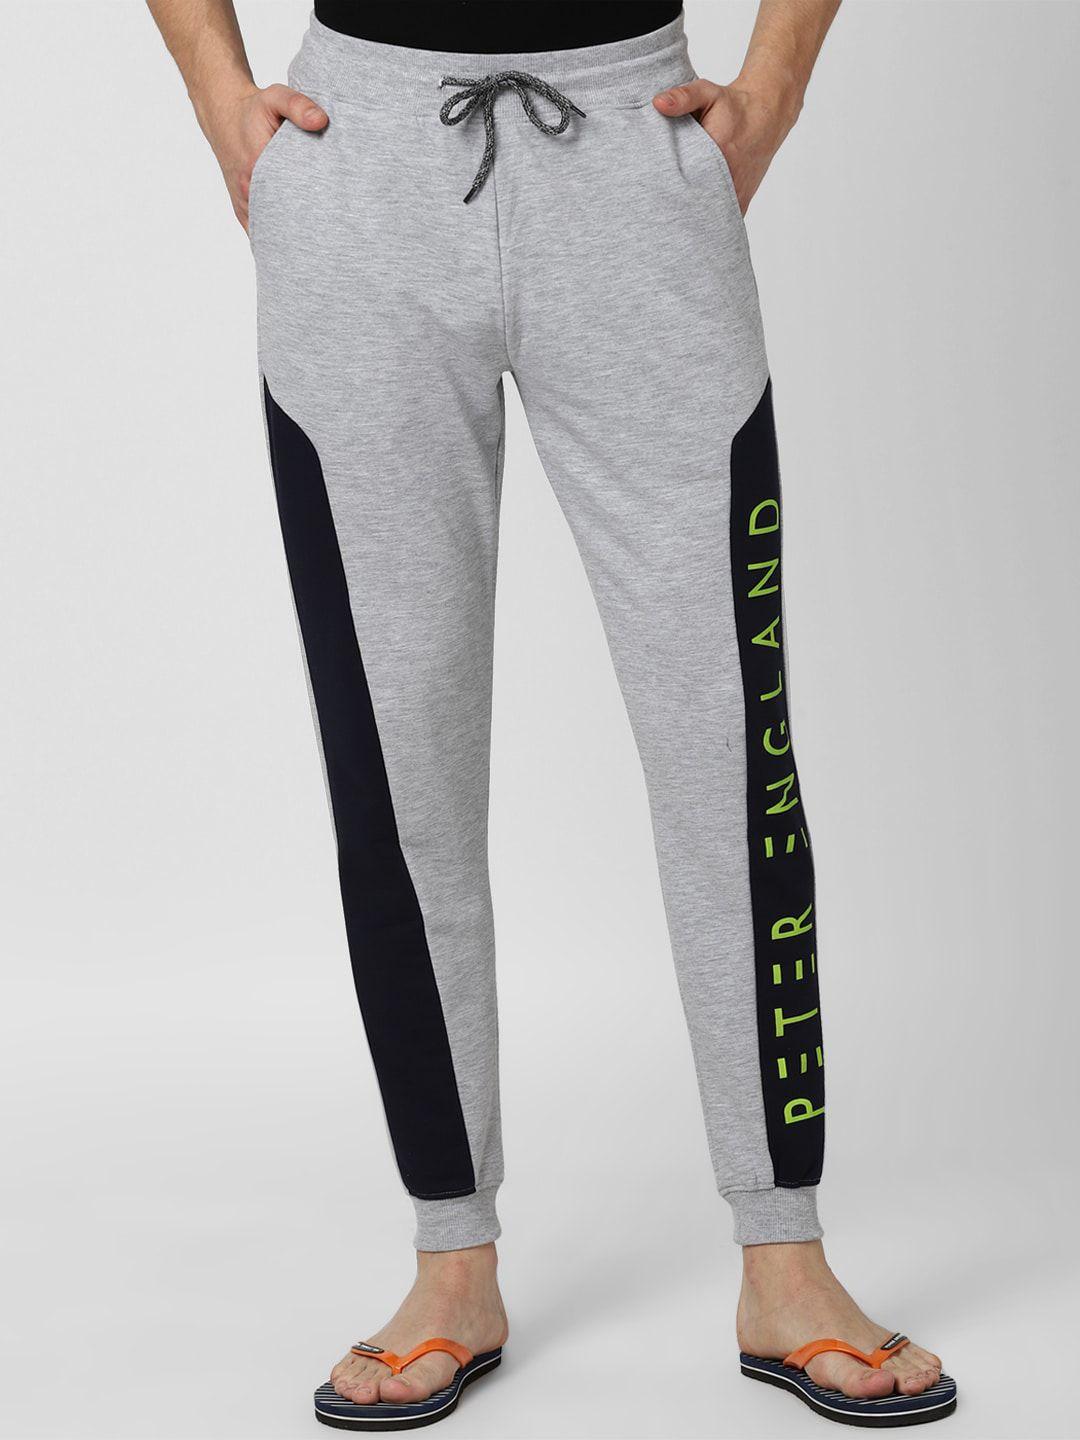 peter-england-casuals-printed-jogger-lounge-pants